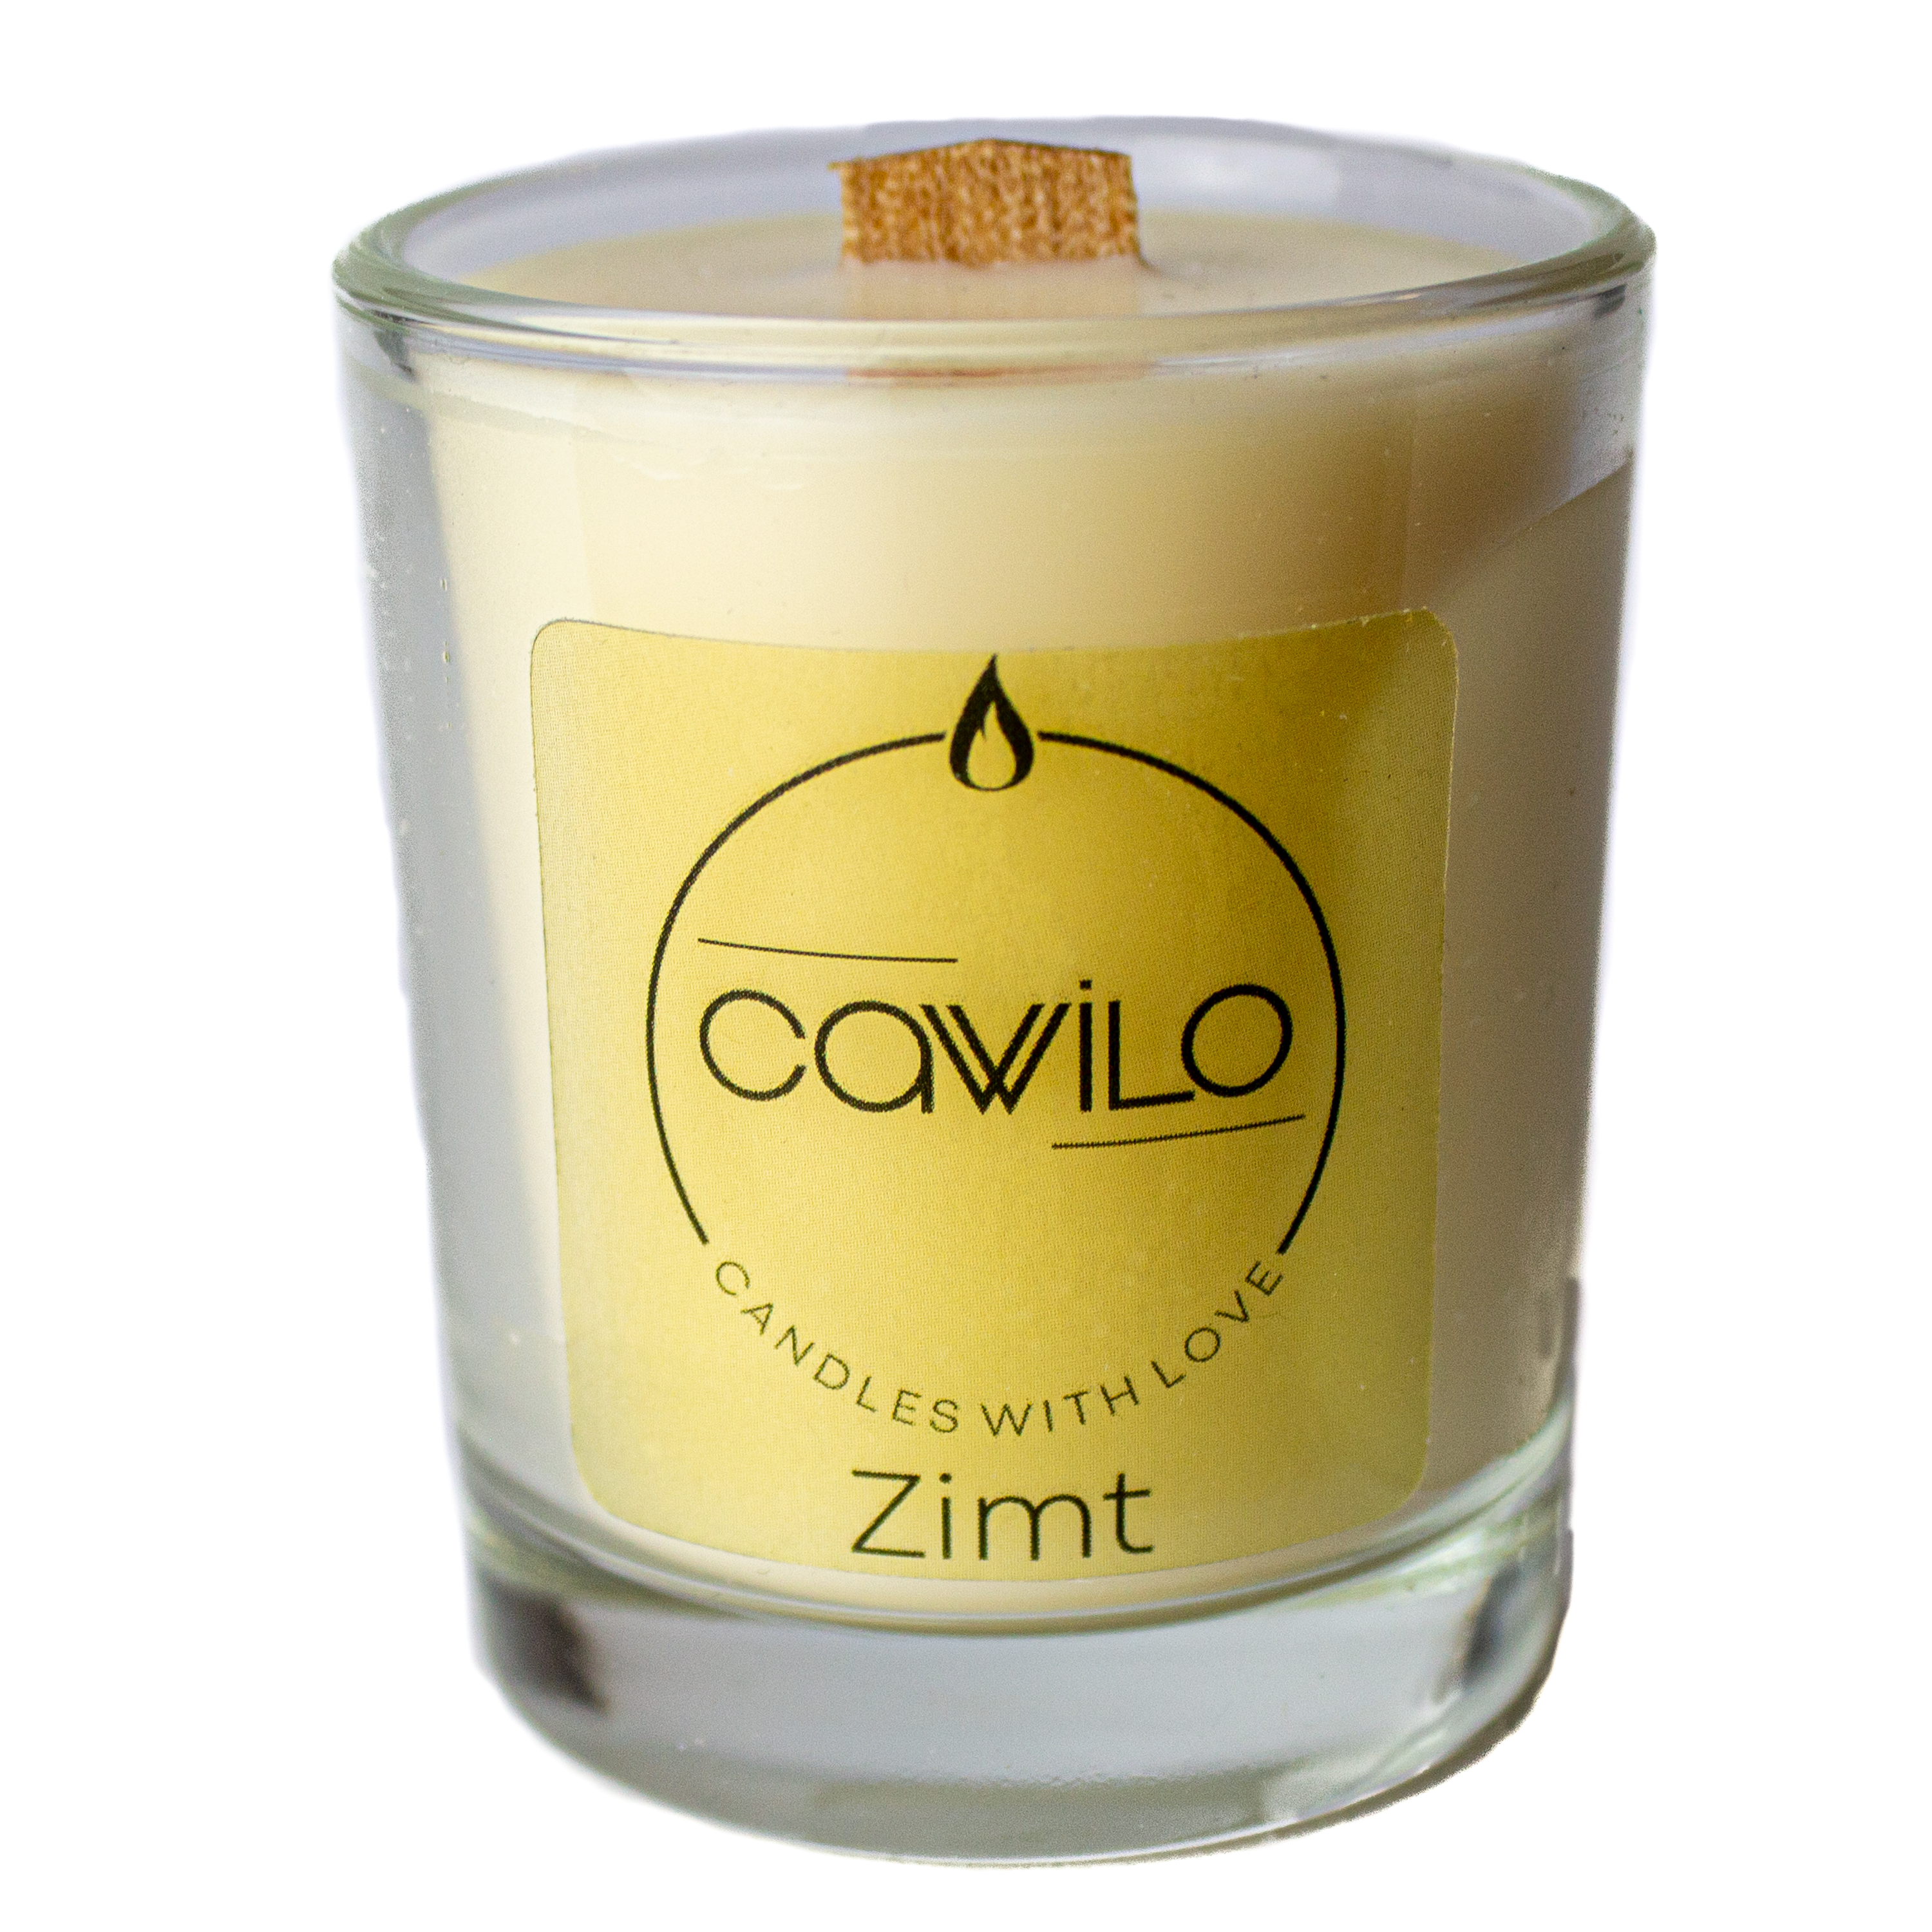 Cawilo Mini Zimt - Cawilo - Candles with love